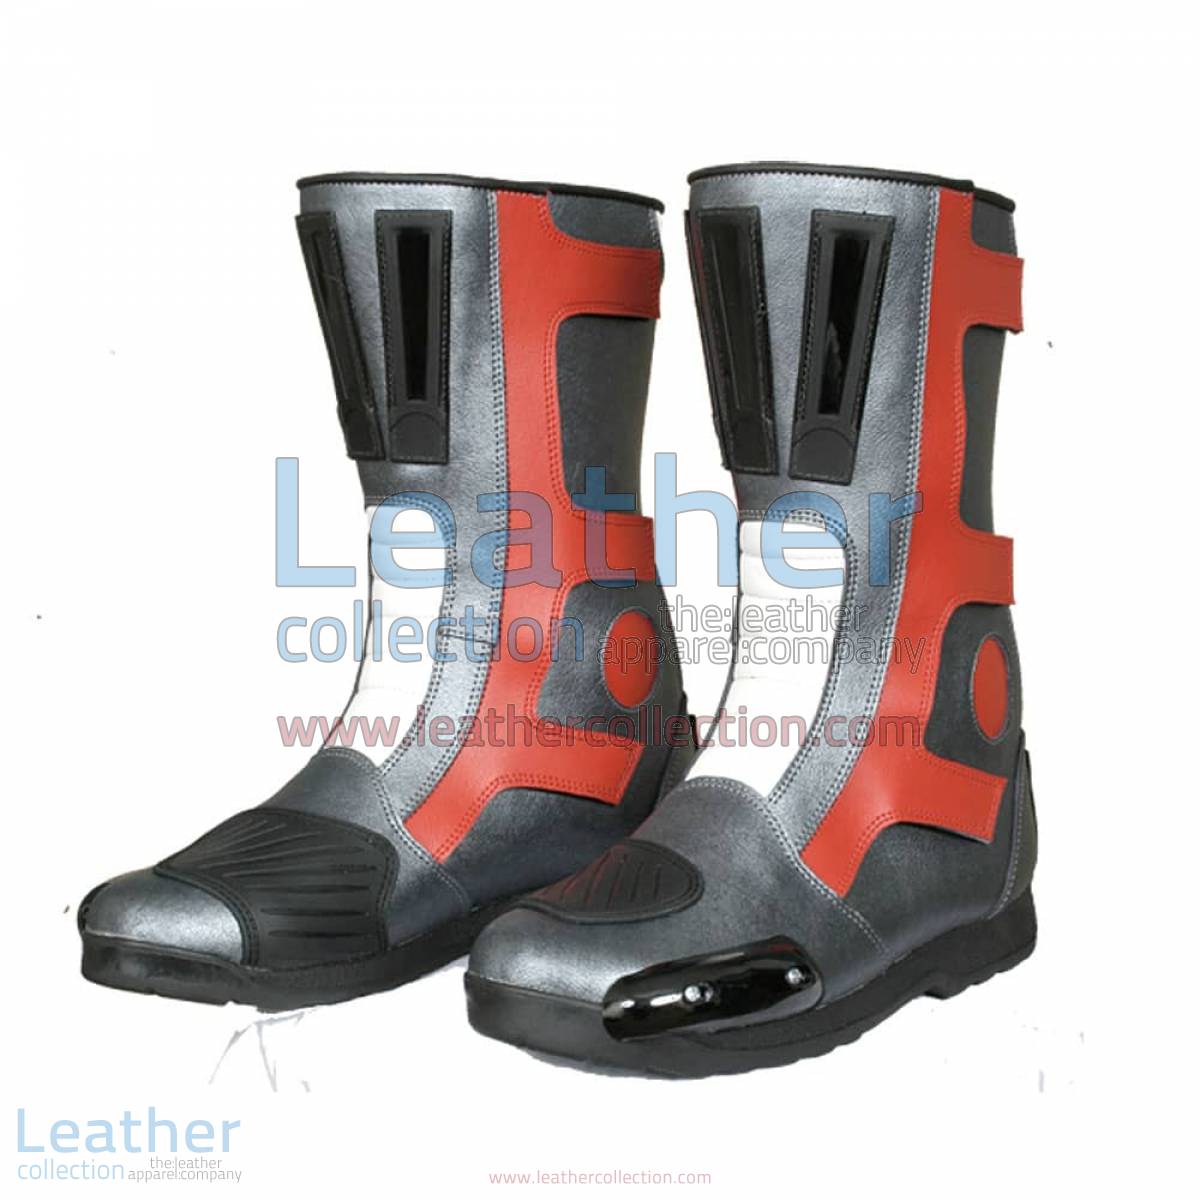 Tourist Leather Race Boots | leather race boots